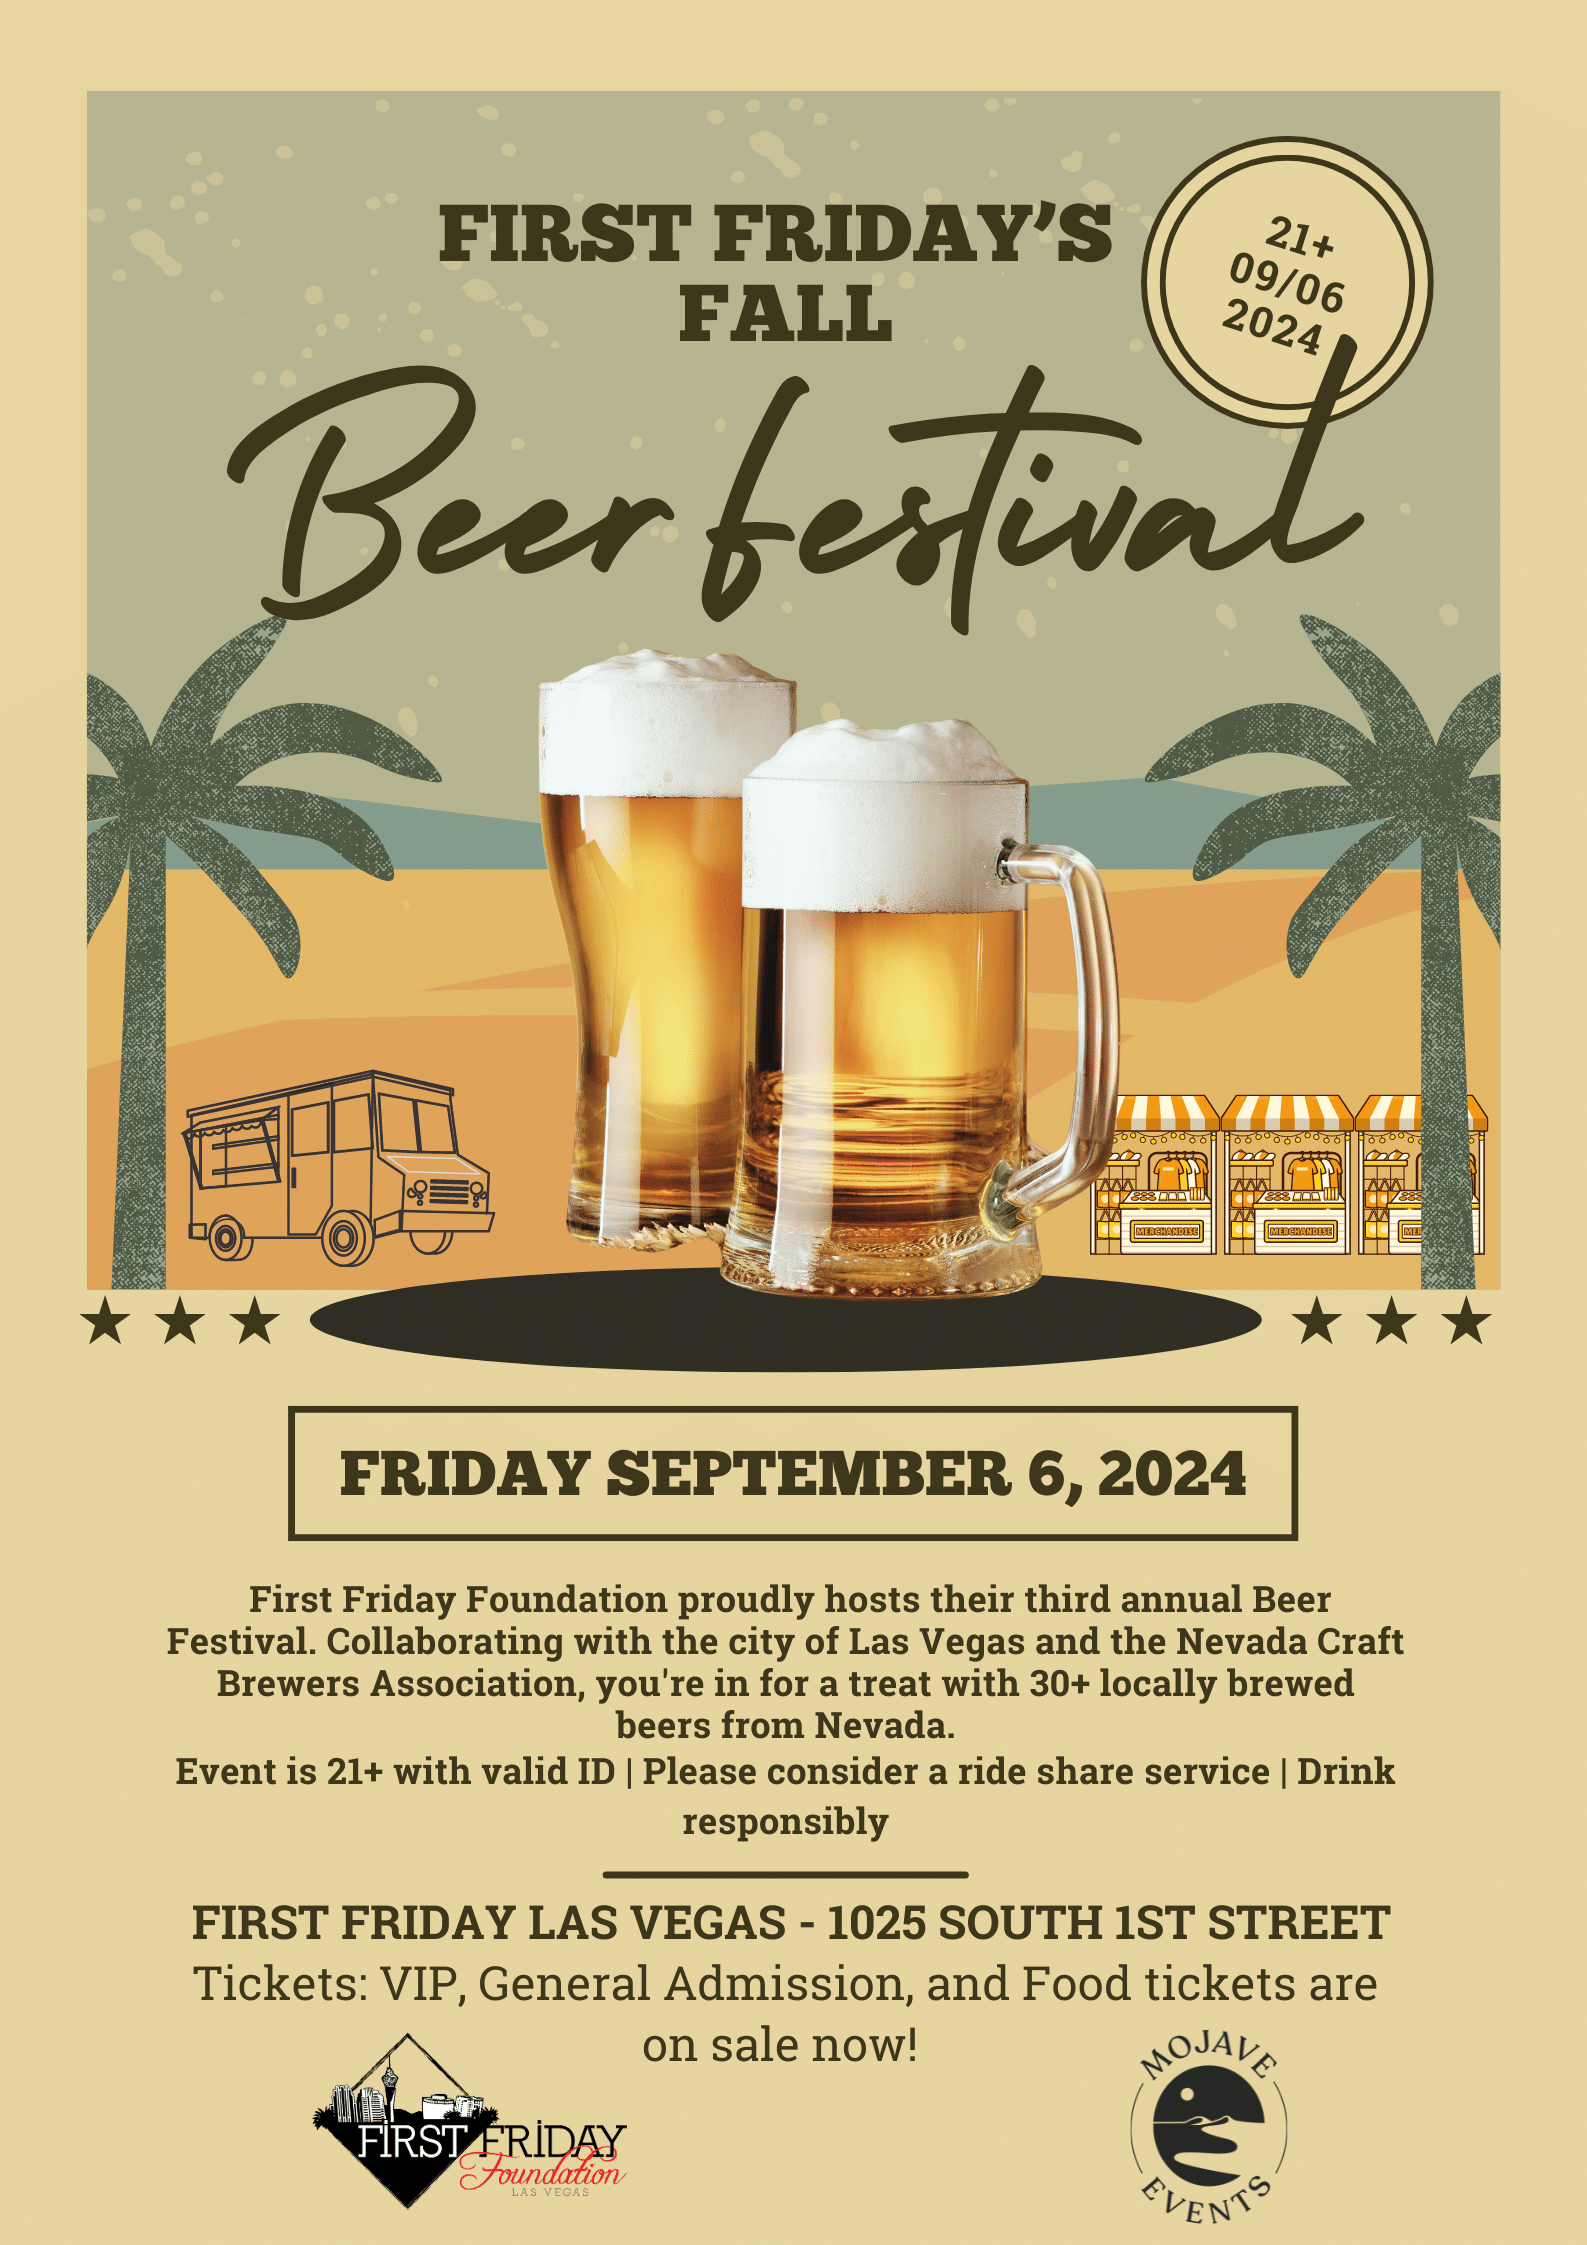 FIRST FRIDAY'S FALL BEER FESTIVAL!